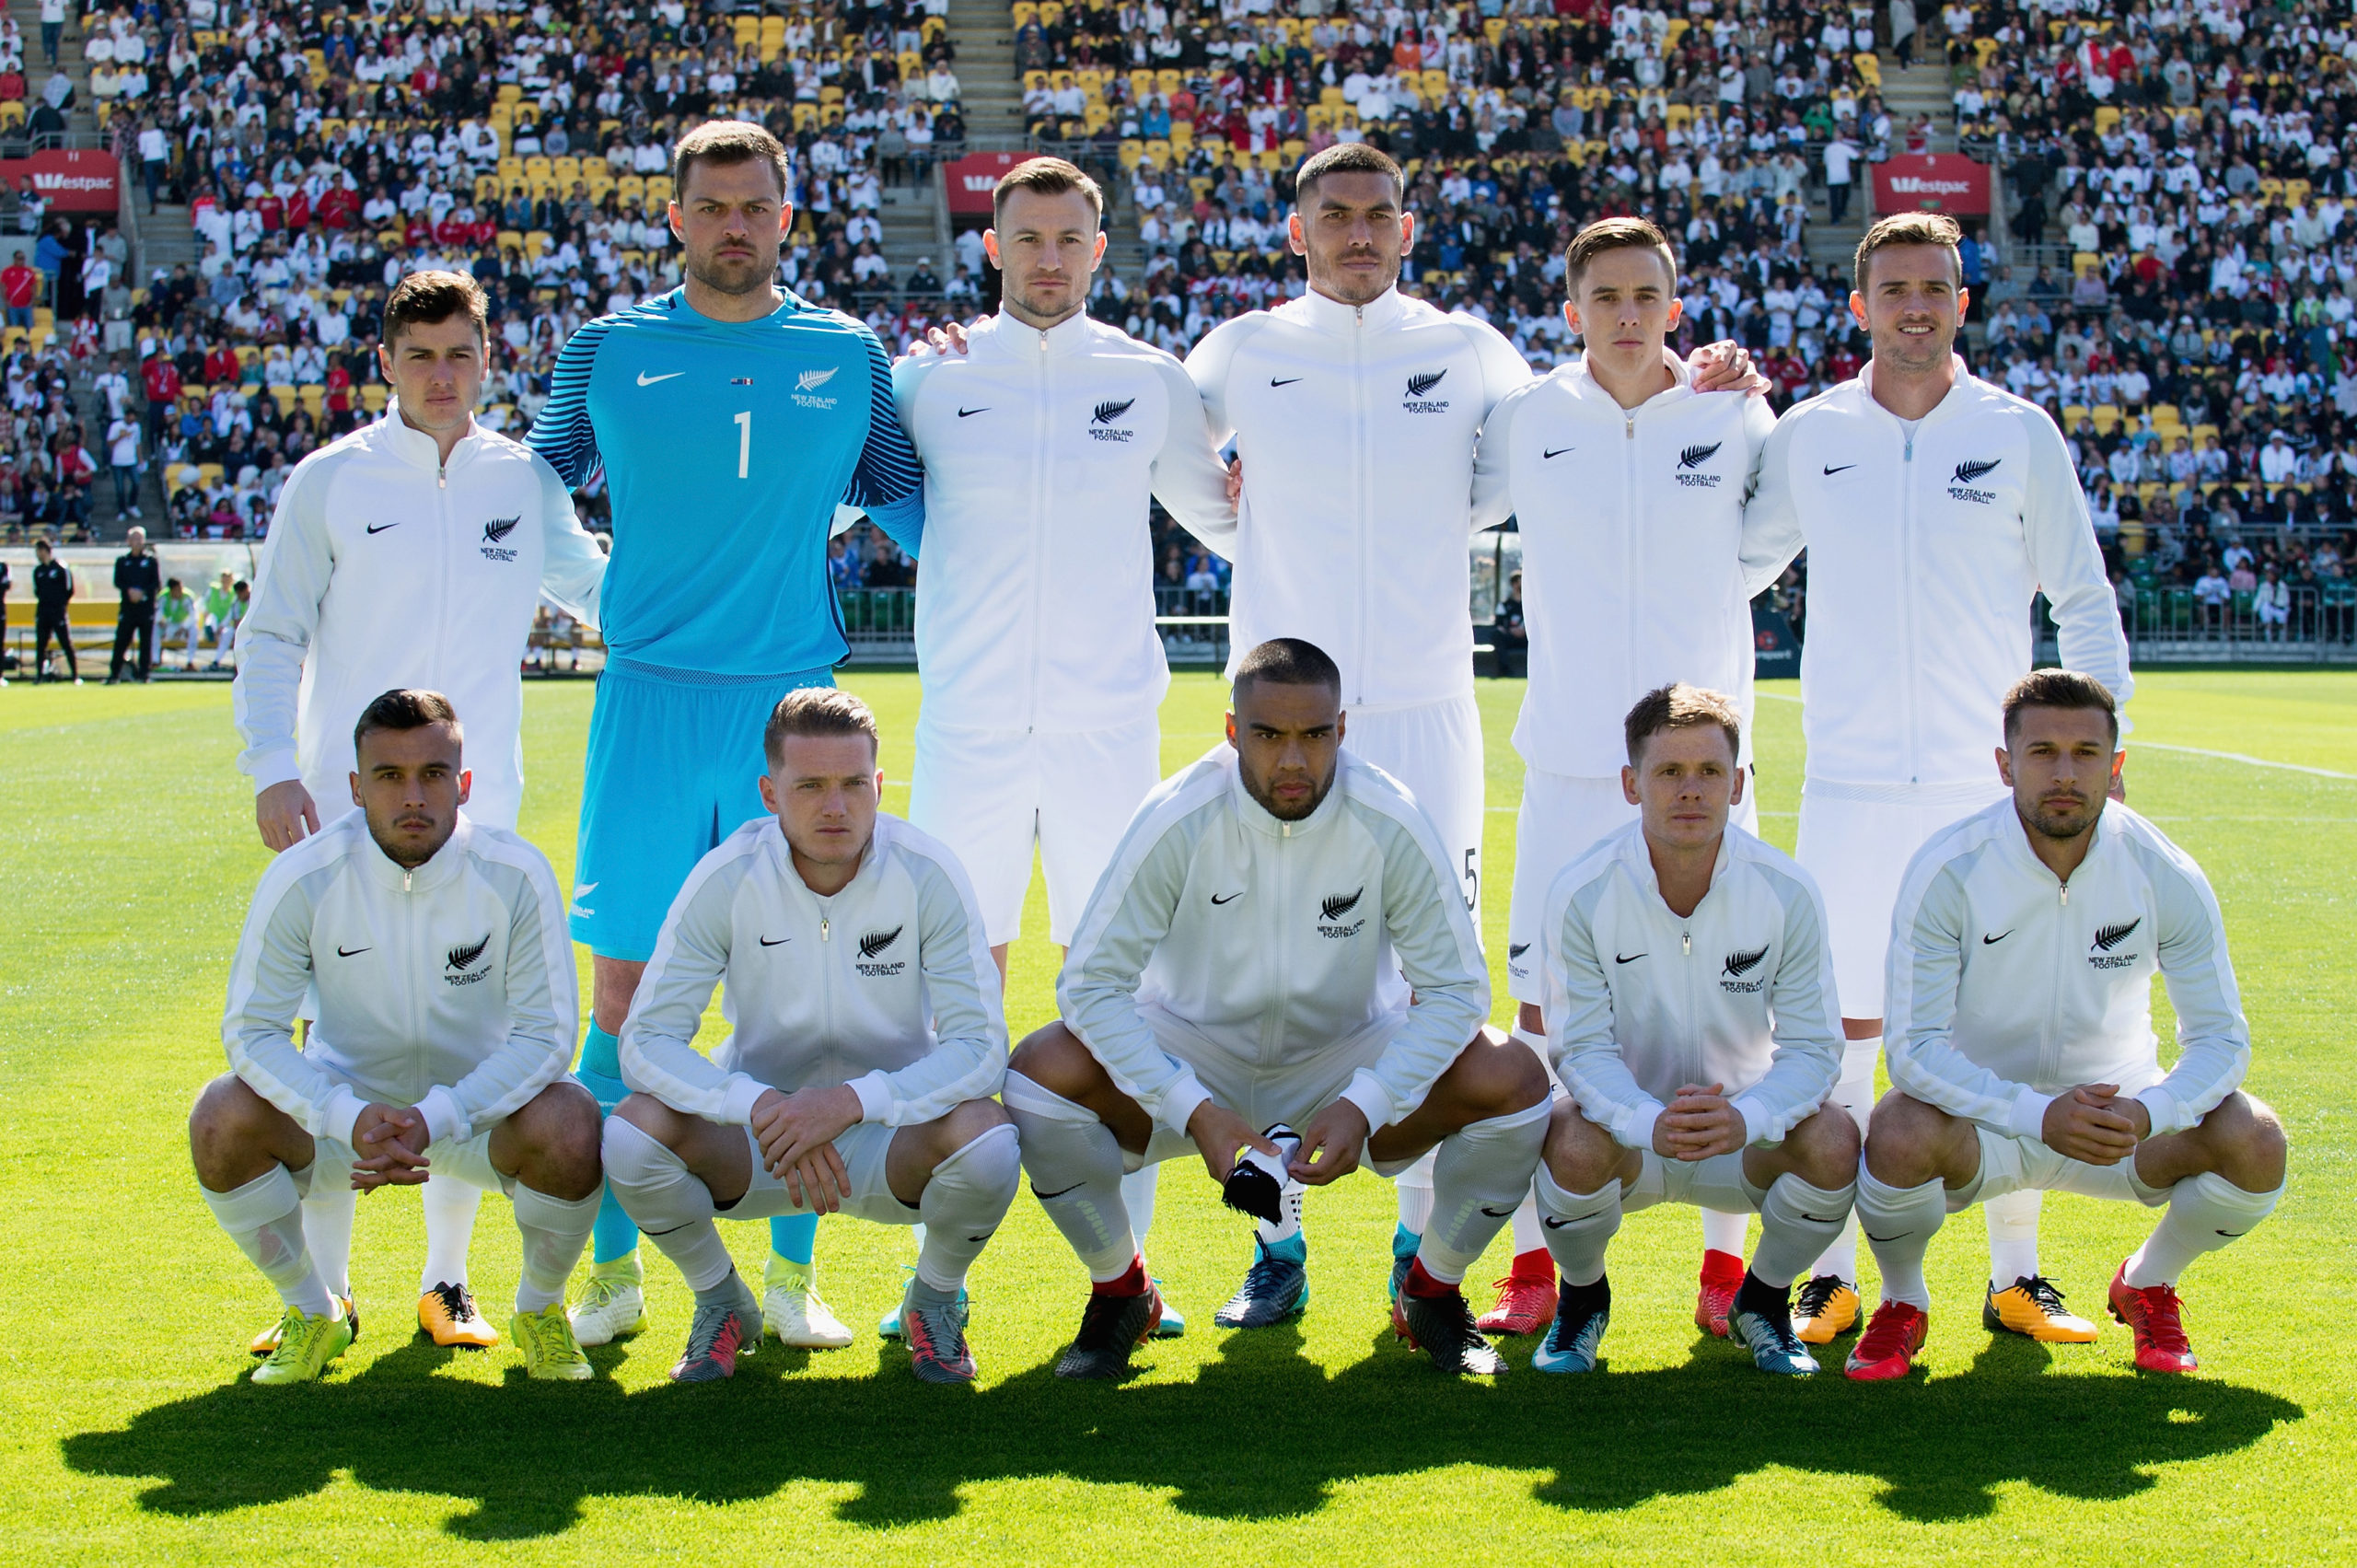 WELLINGTON, NEW ZEALAND - NOVEMBER 11: The All Whites pose for their team photo prior to the 2018 FIFA World Cup Qualifier match between the New Zealand All Whites and Peru at Westpac Stadium on November 11, 2017 in Wellington, New Zealand. (Photo by Kai Schwoerer/Getty Images)